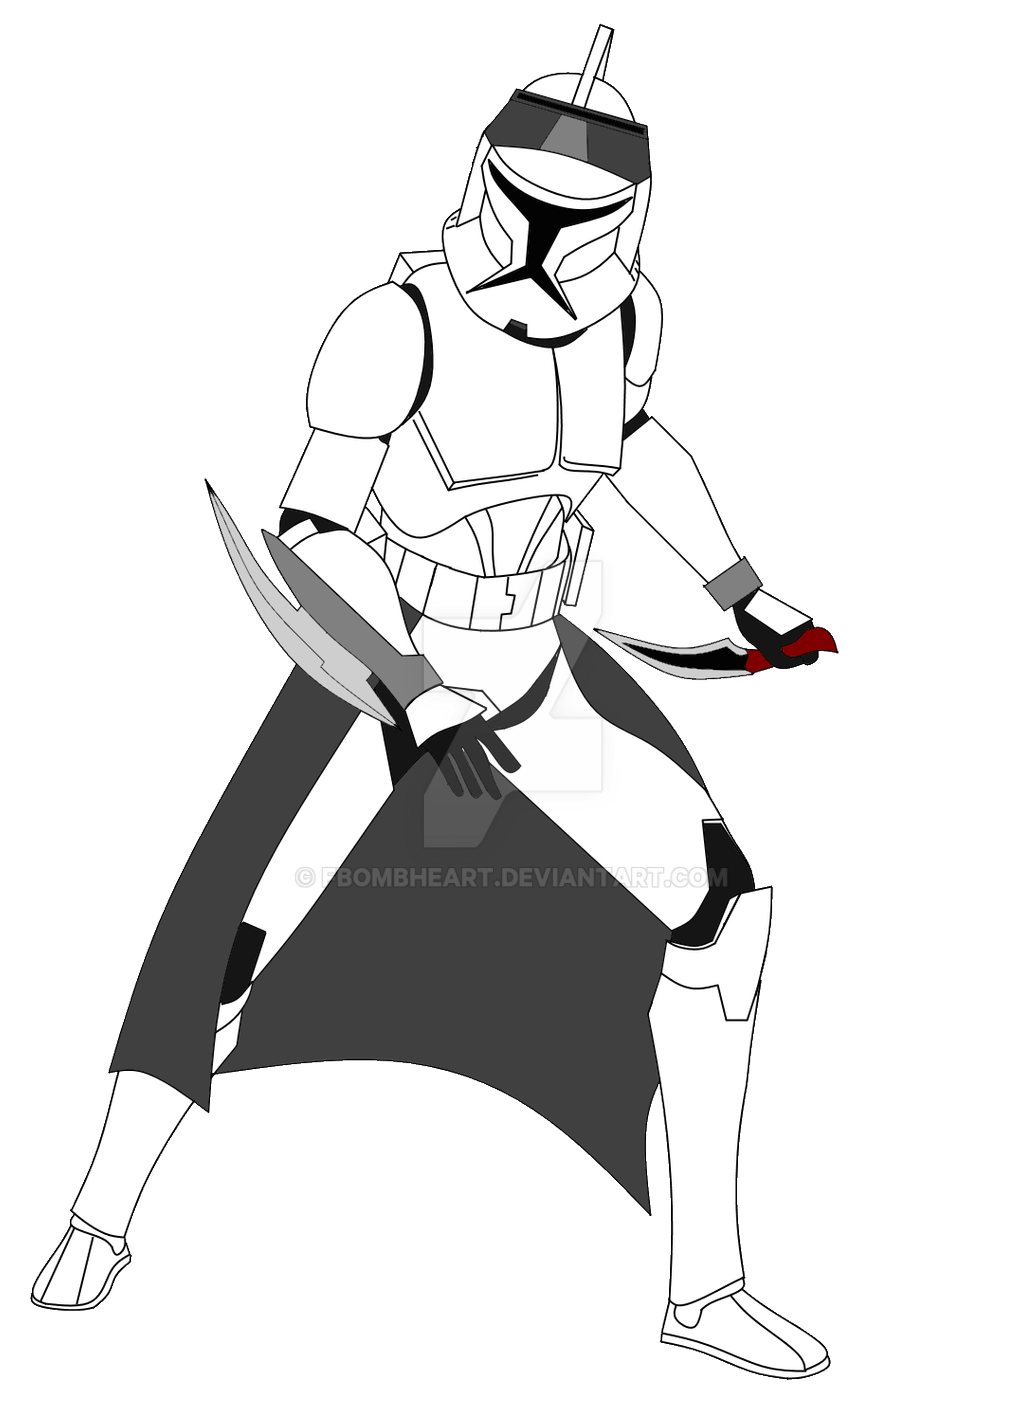 Clone assassin phase v by fbombheart on deviantart clone trooper clone trooper